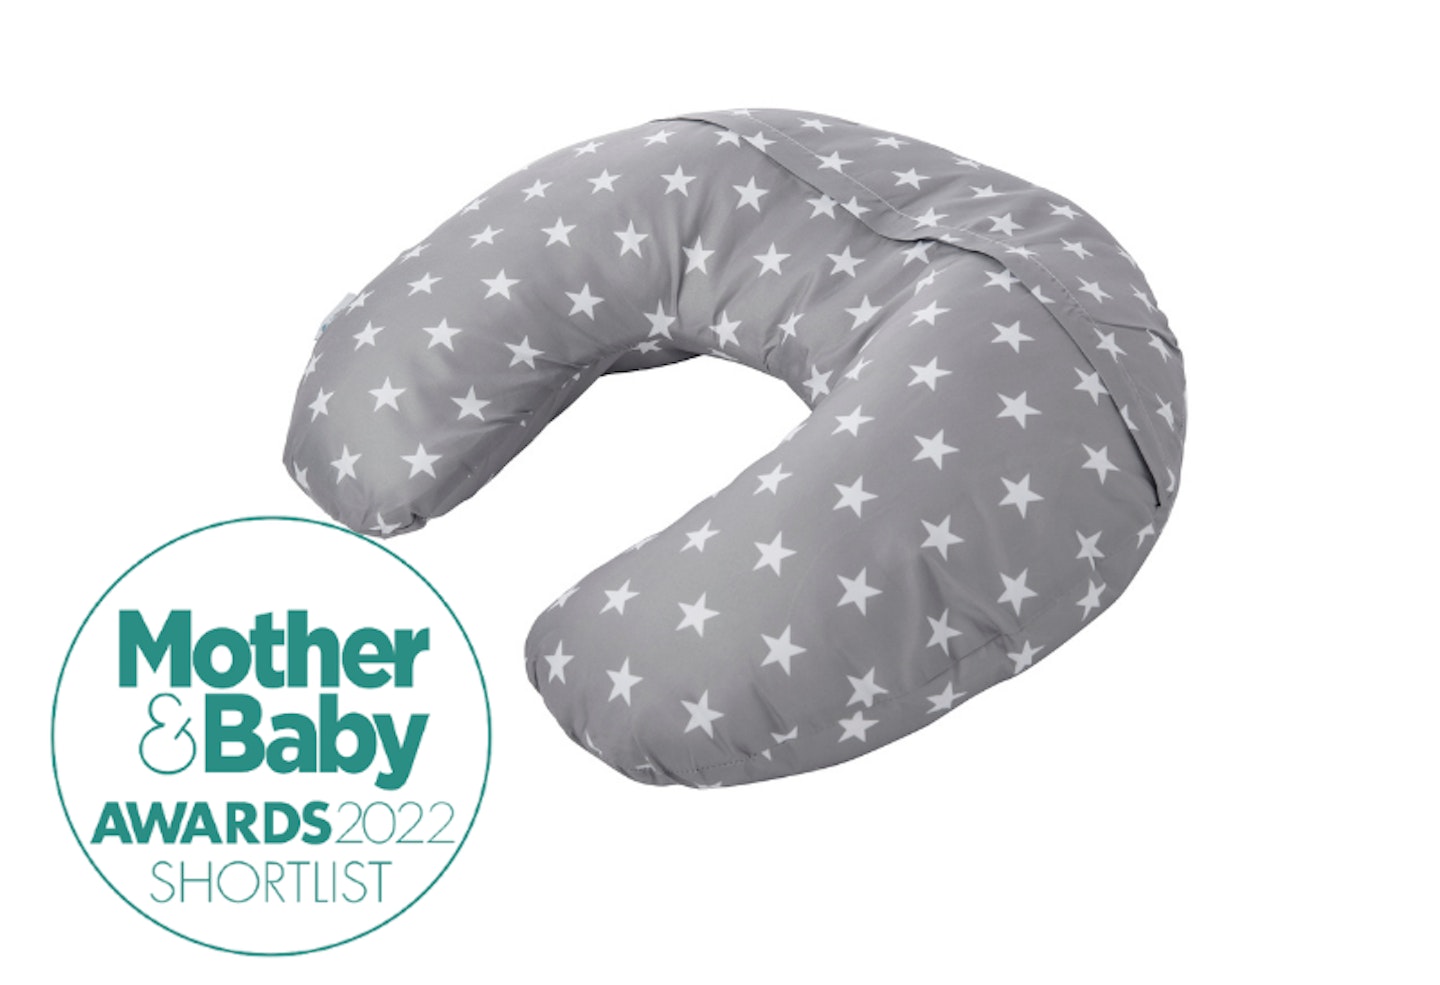 Nursing Pillow - Grey with white star for your little one shortlist